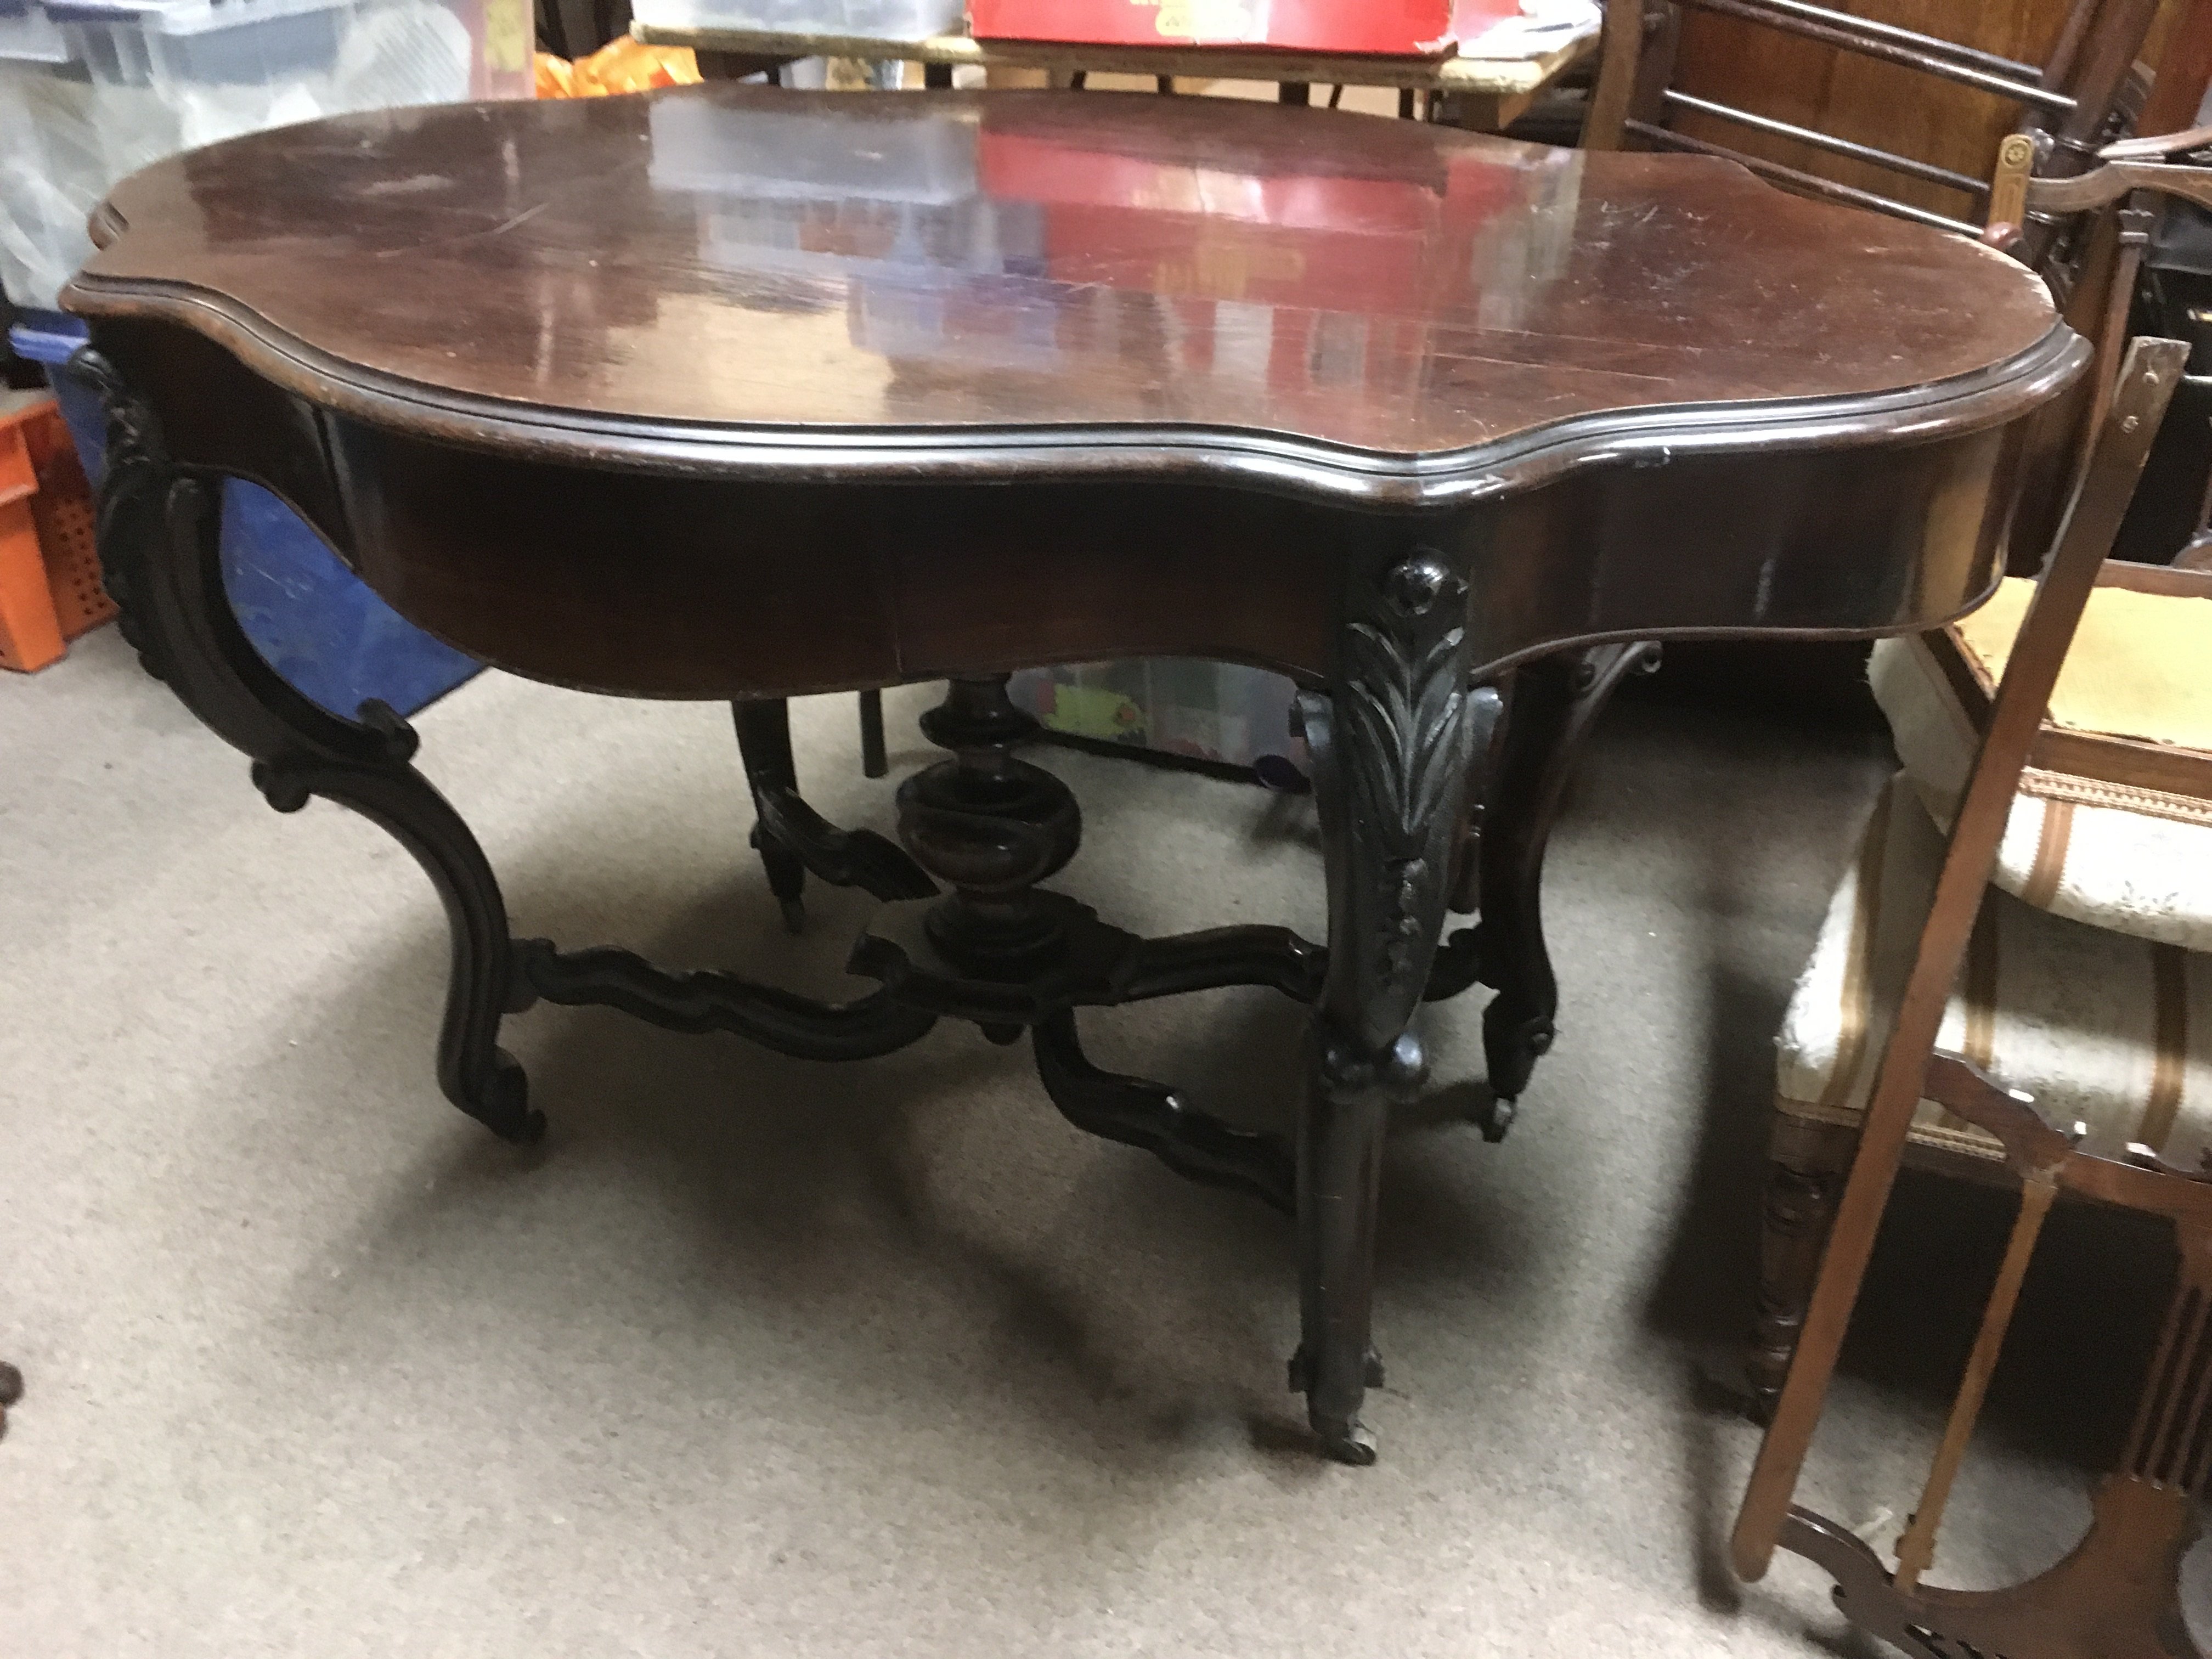 A 19th Century rosewood table with shaped top, som